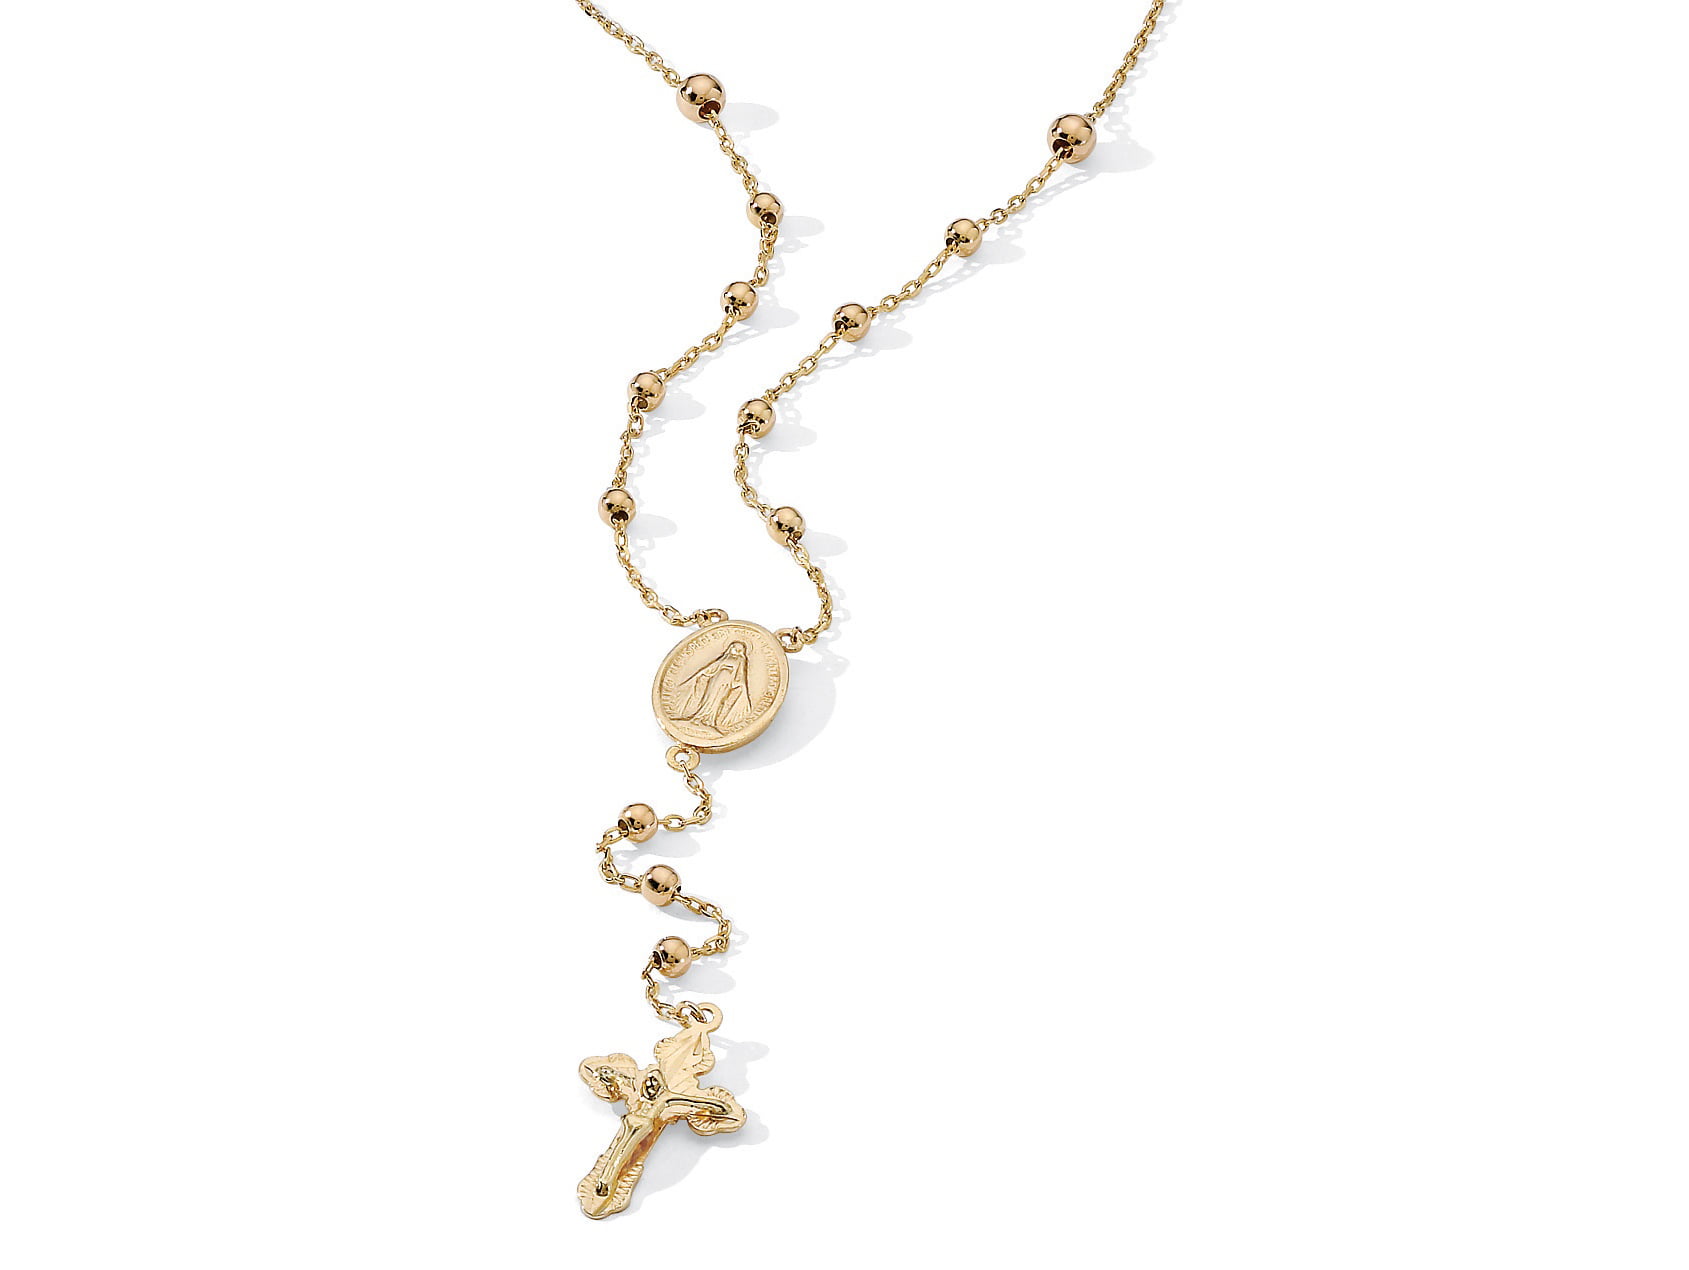 Rosary Style Necklace in 18k Gold over 